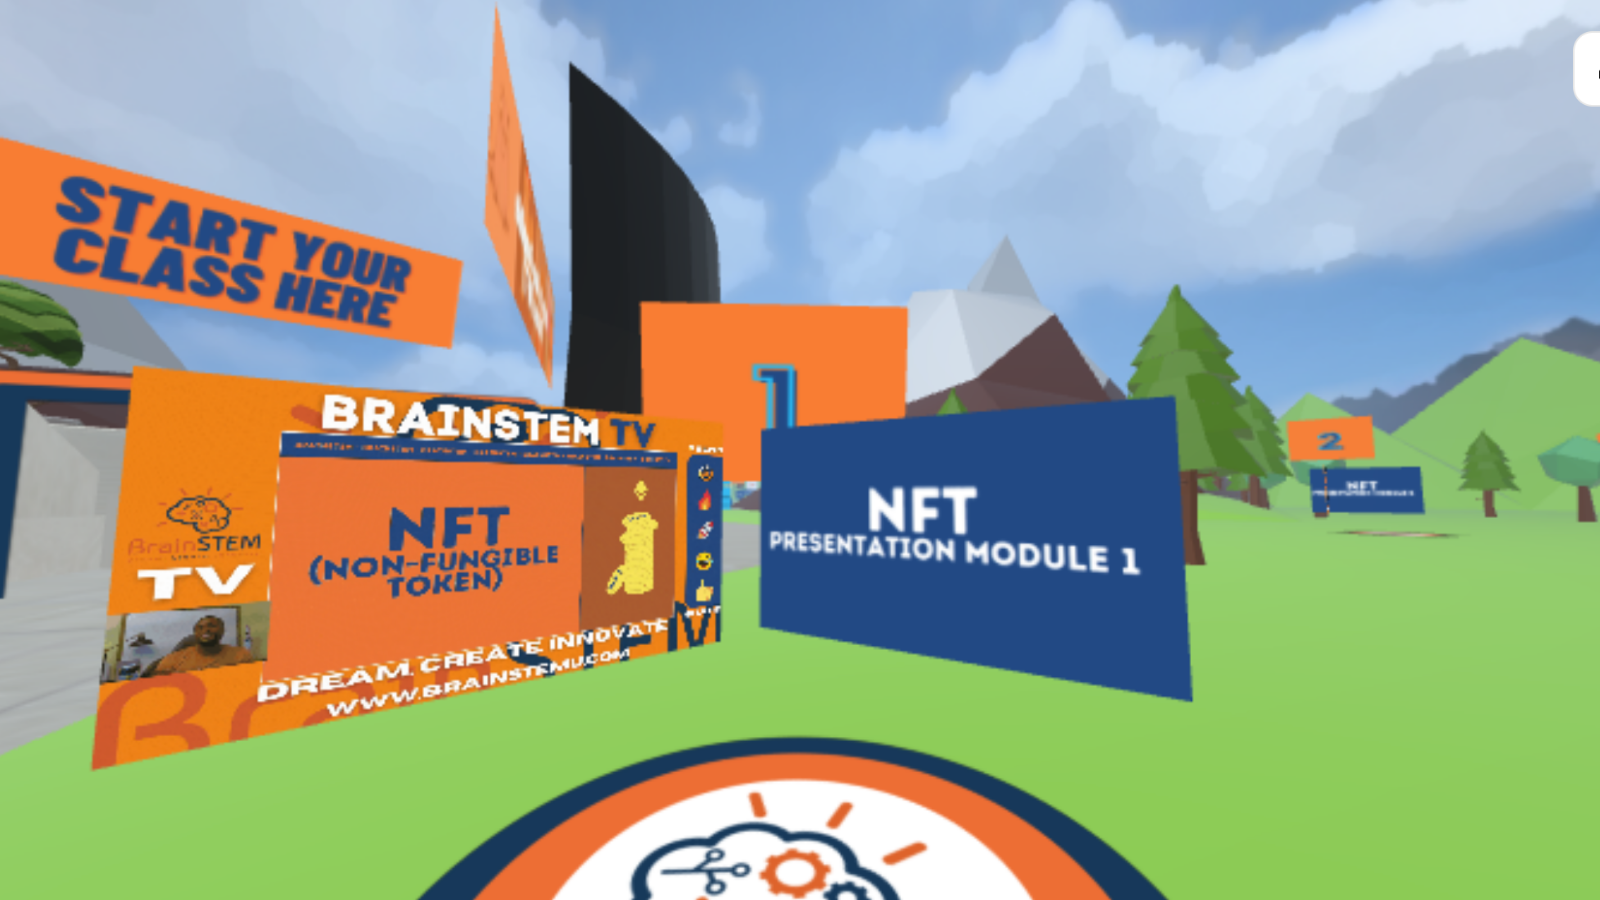 Intro to NFT class in the metaverse